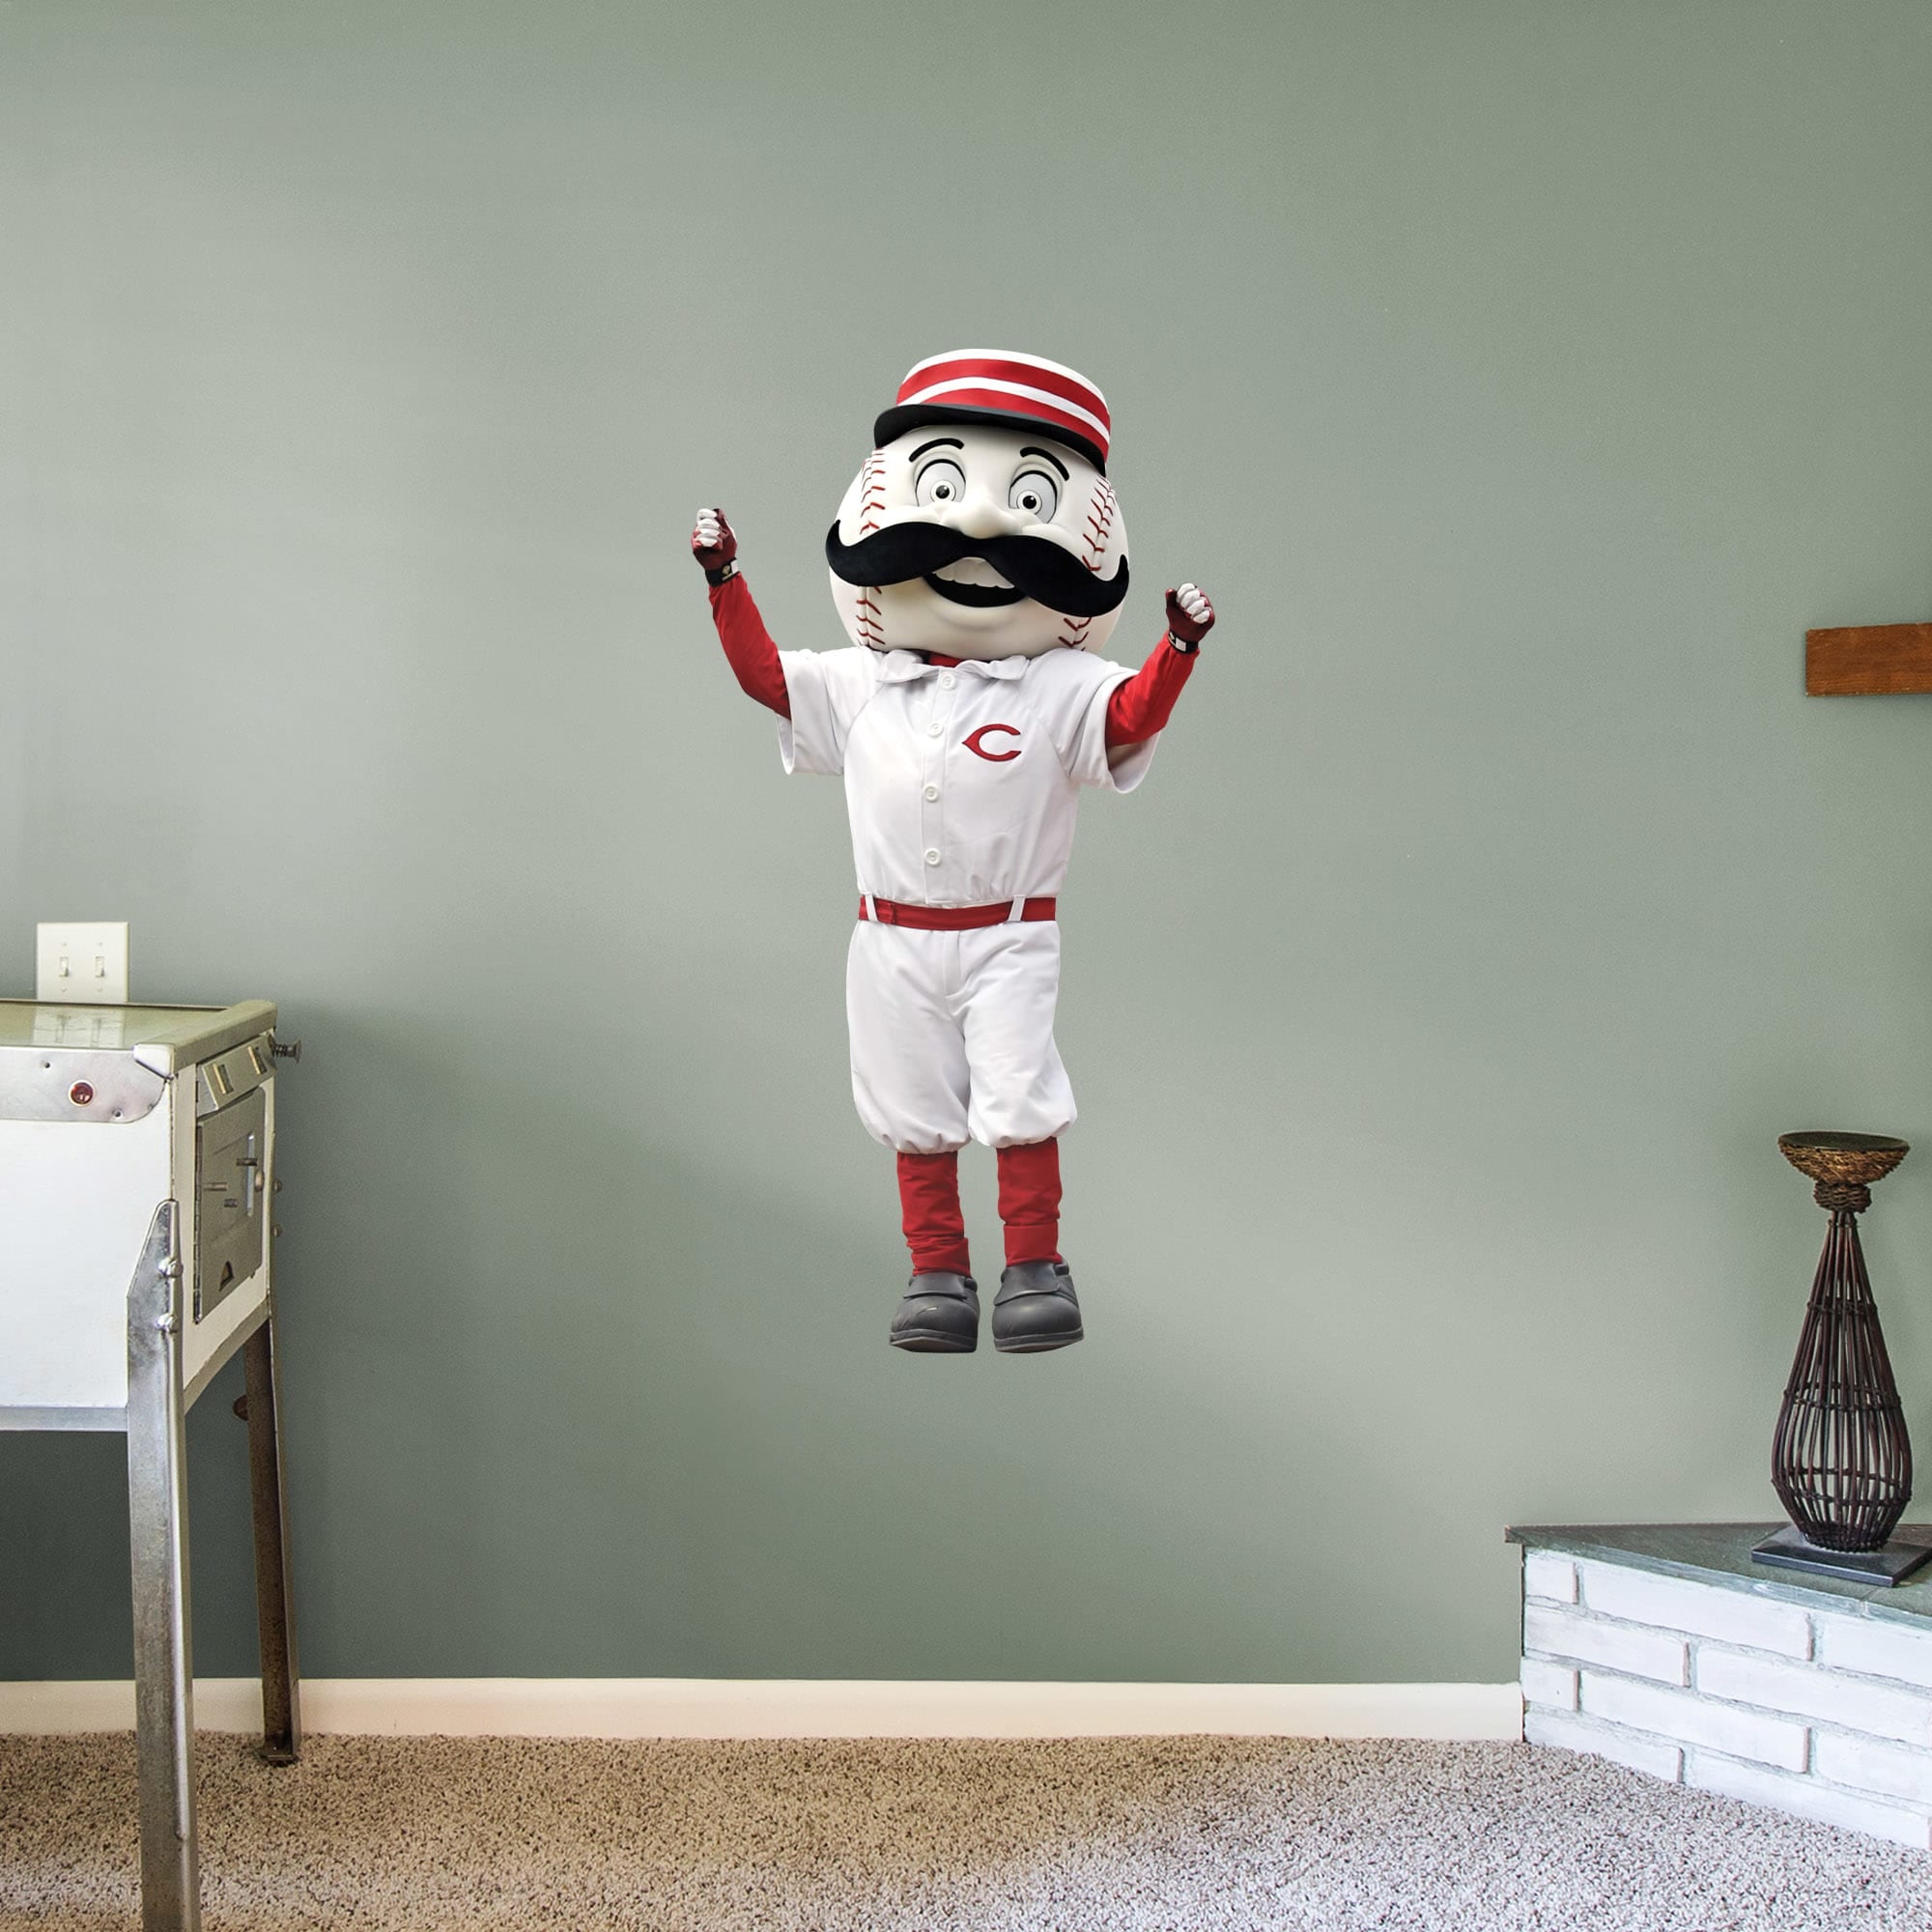 Cincinnati Reds: Mr. Redlegs Mascot - Officially Licensed MLB Removable Wall Decal Giant Mascot + 2 Decals (27"W x 51"H) by Fath